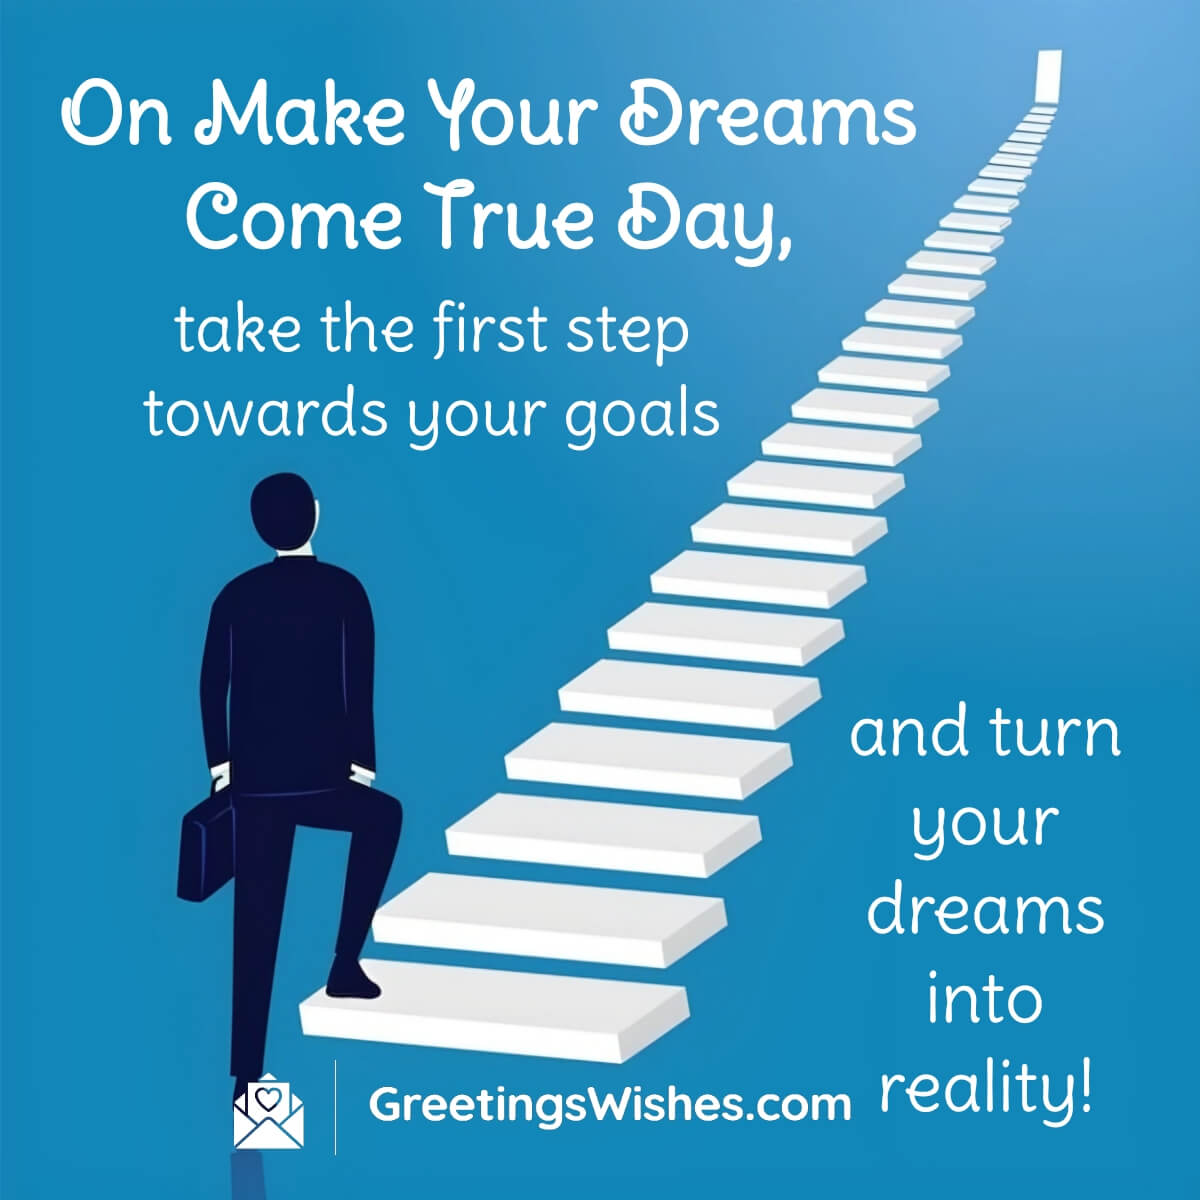 Make Your Dreams Come True Day Messages